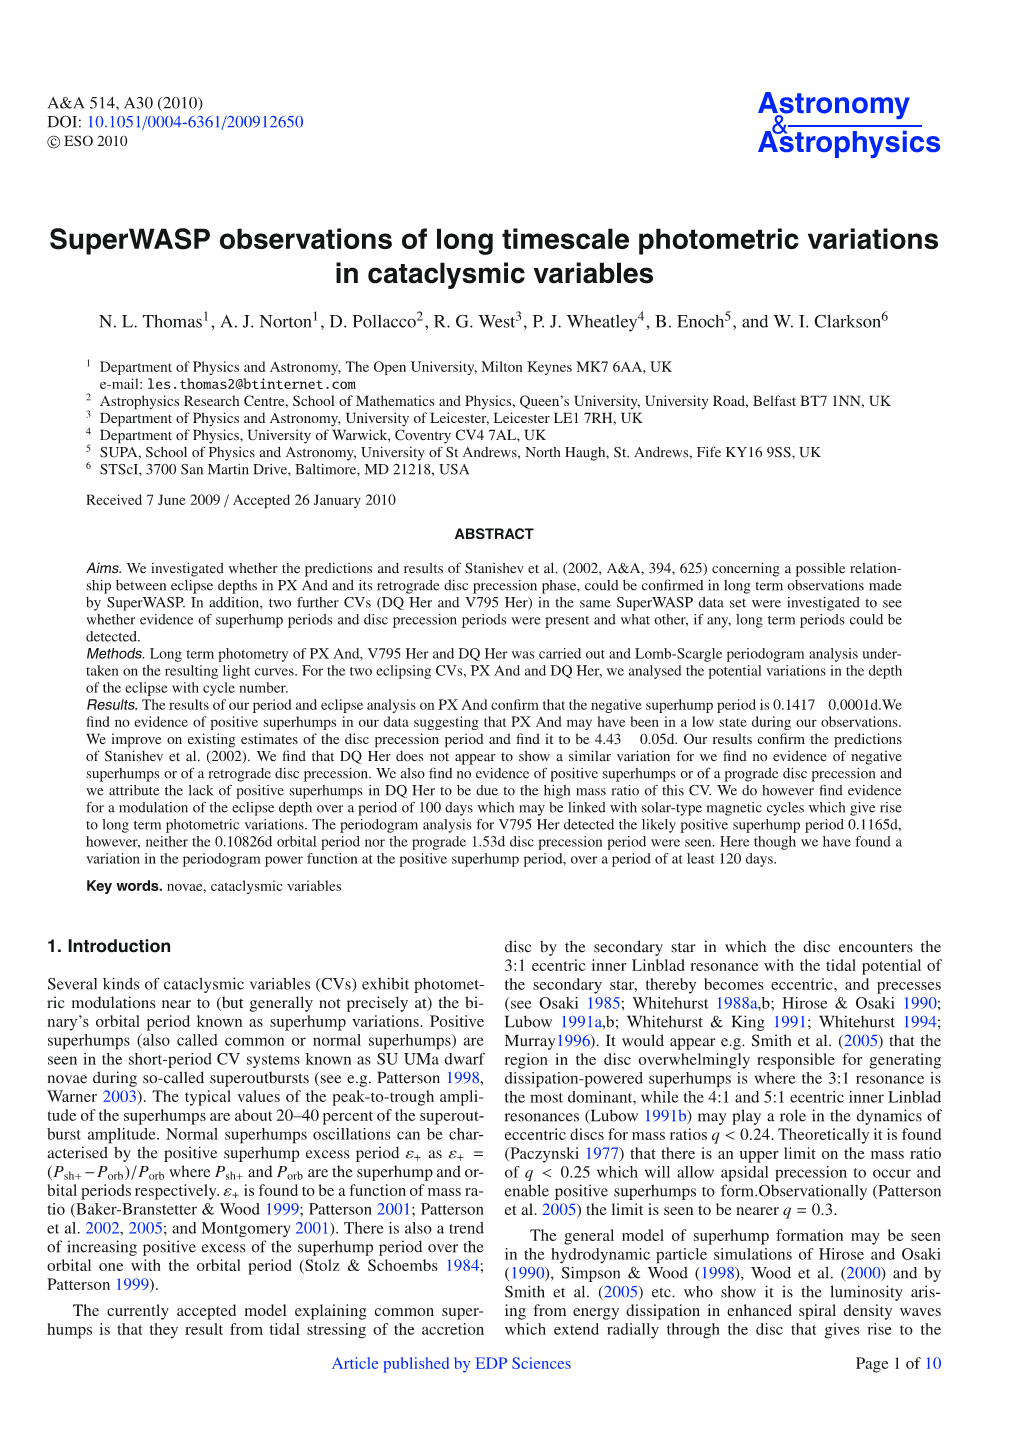 Superwasp Observations of Long Timescale Photometric Variations in Cataclysmic Variables